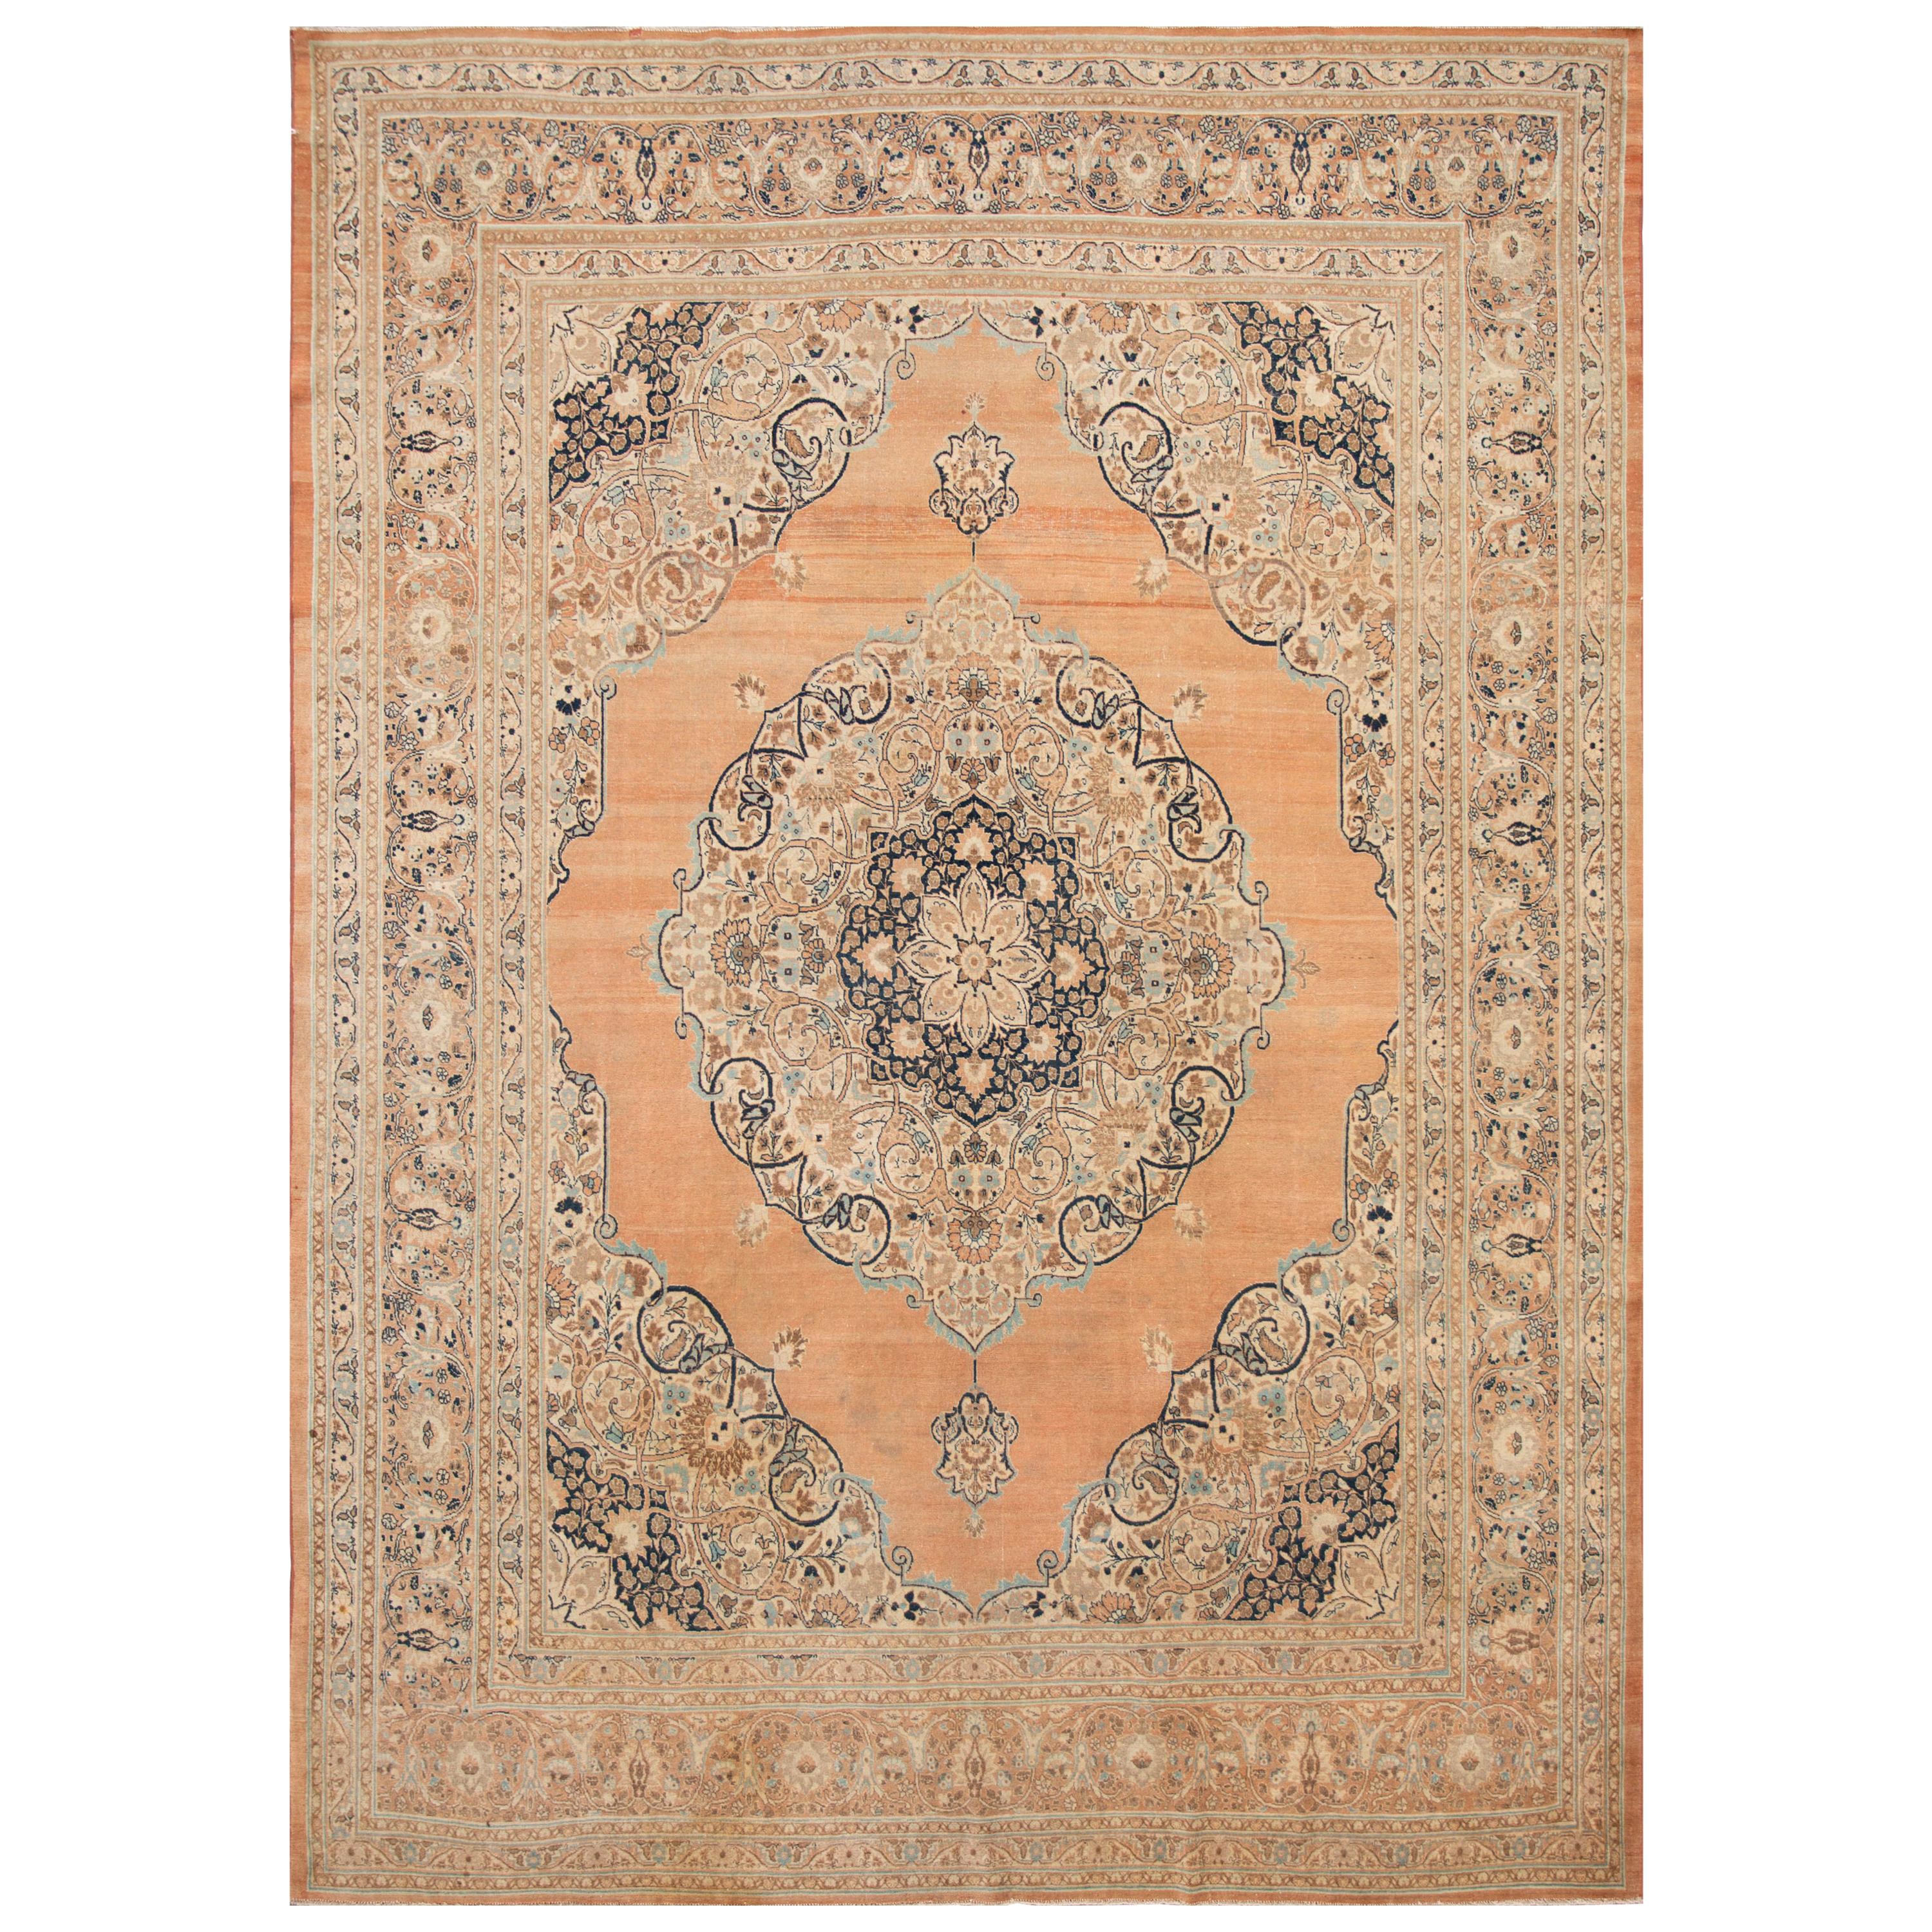 Early 20th Century Antique Tabriz Wool Rug For Sale